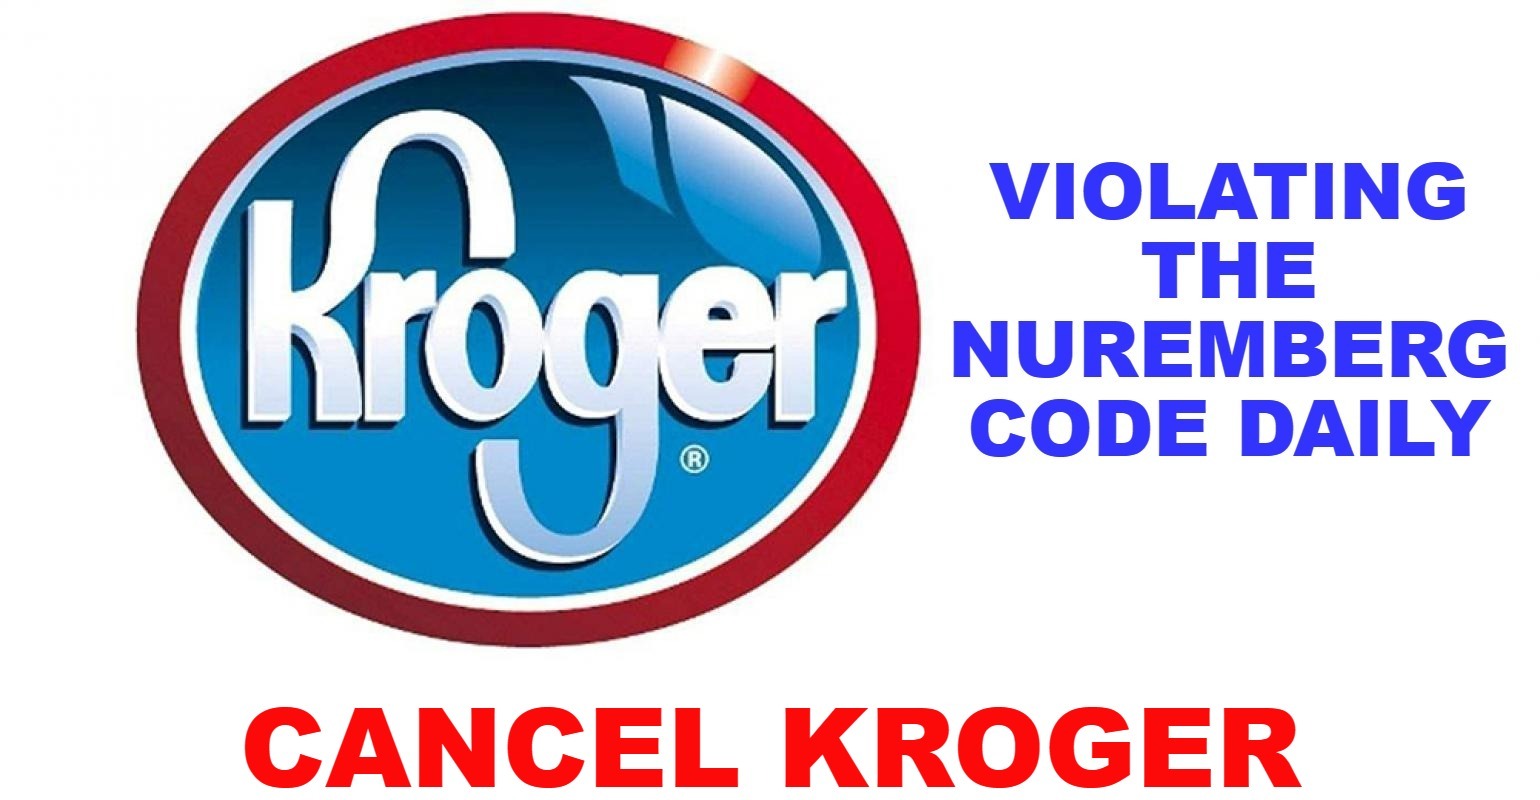 Cancel Kroger Foods Bully Culture | image tagged in boycott kroger foods,cancel kroger,nuremberg code,covidiots,vaccine mandates are illegal,bully culture | made w/ Imgflip meme maker